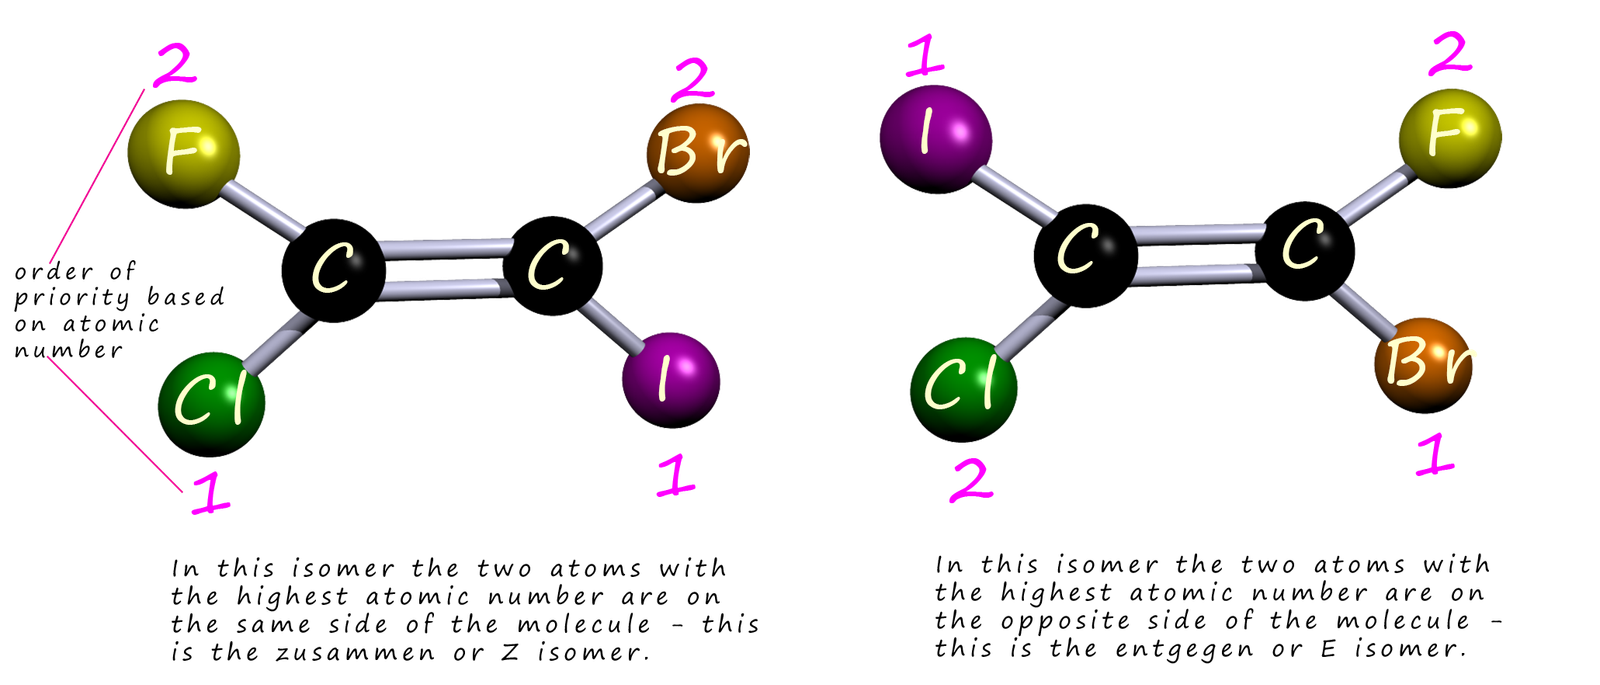 3d models to explain the E Z naming system for geometric isomers.